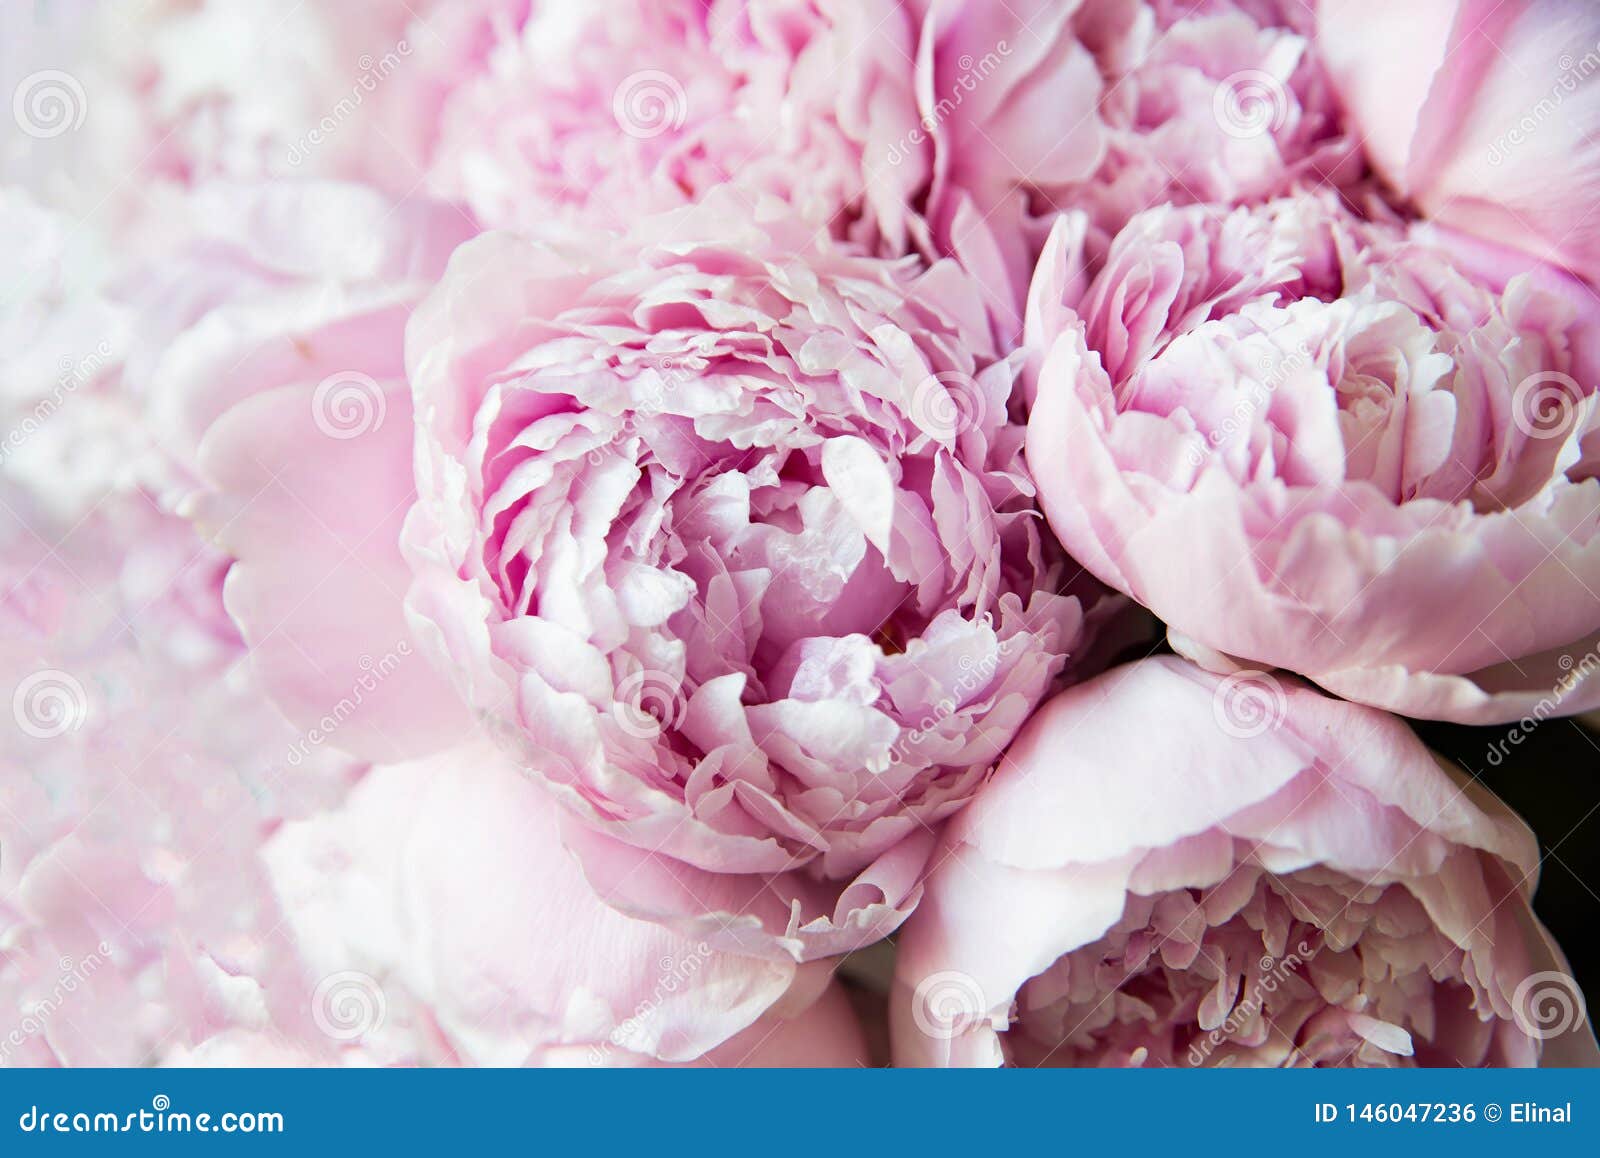 white and pink peonies. background romantic wallpaper